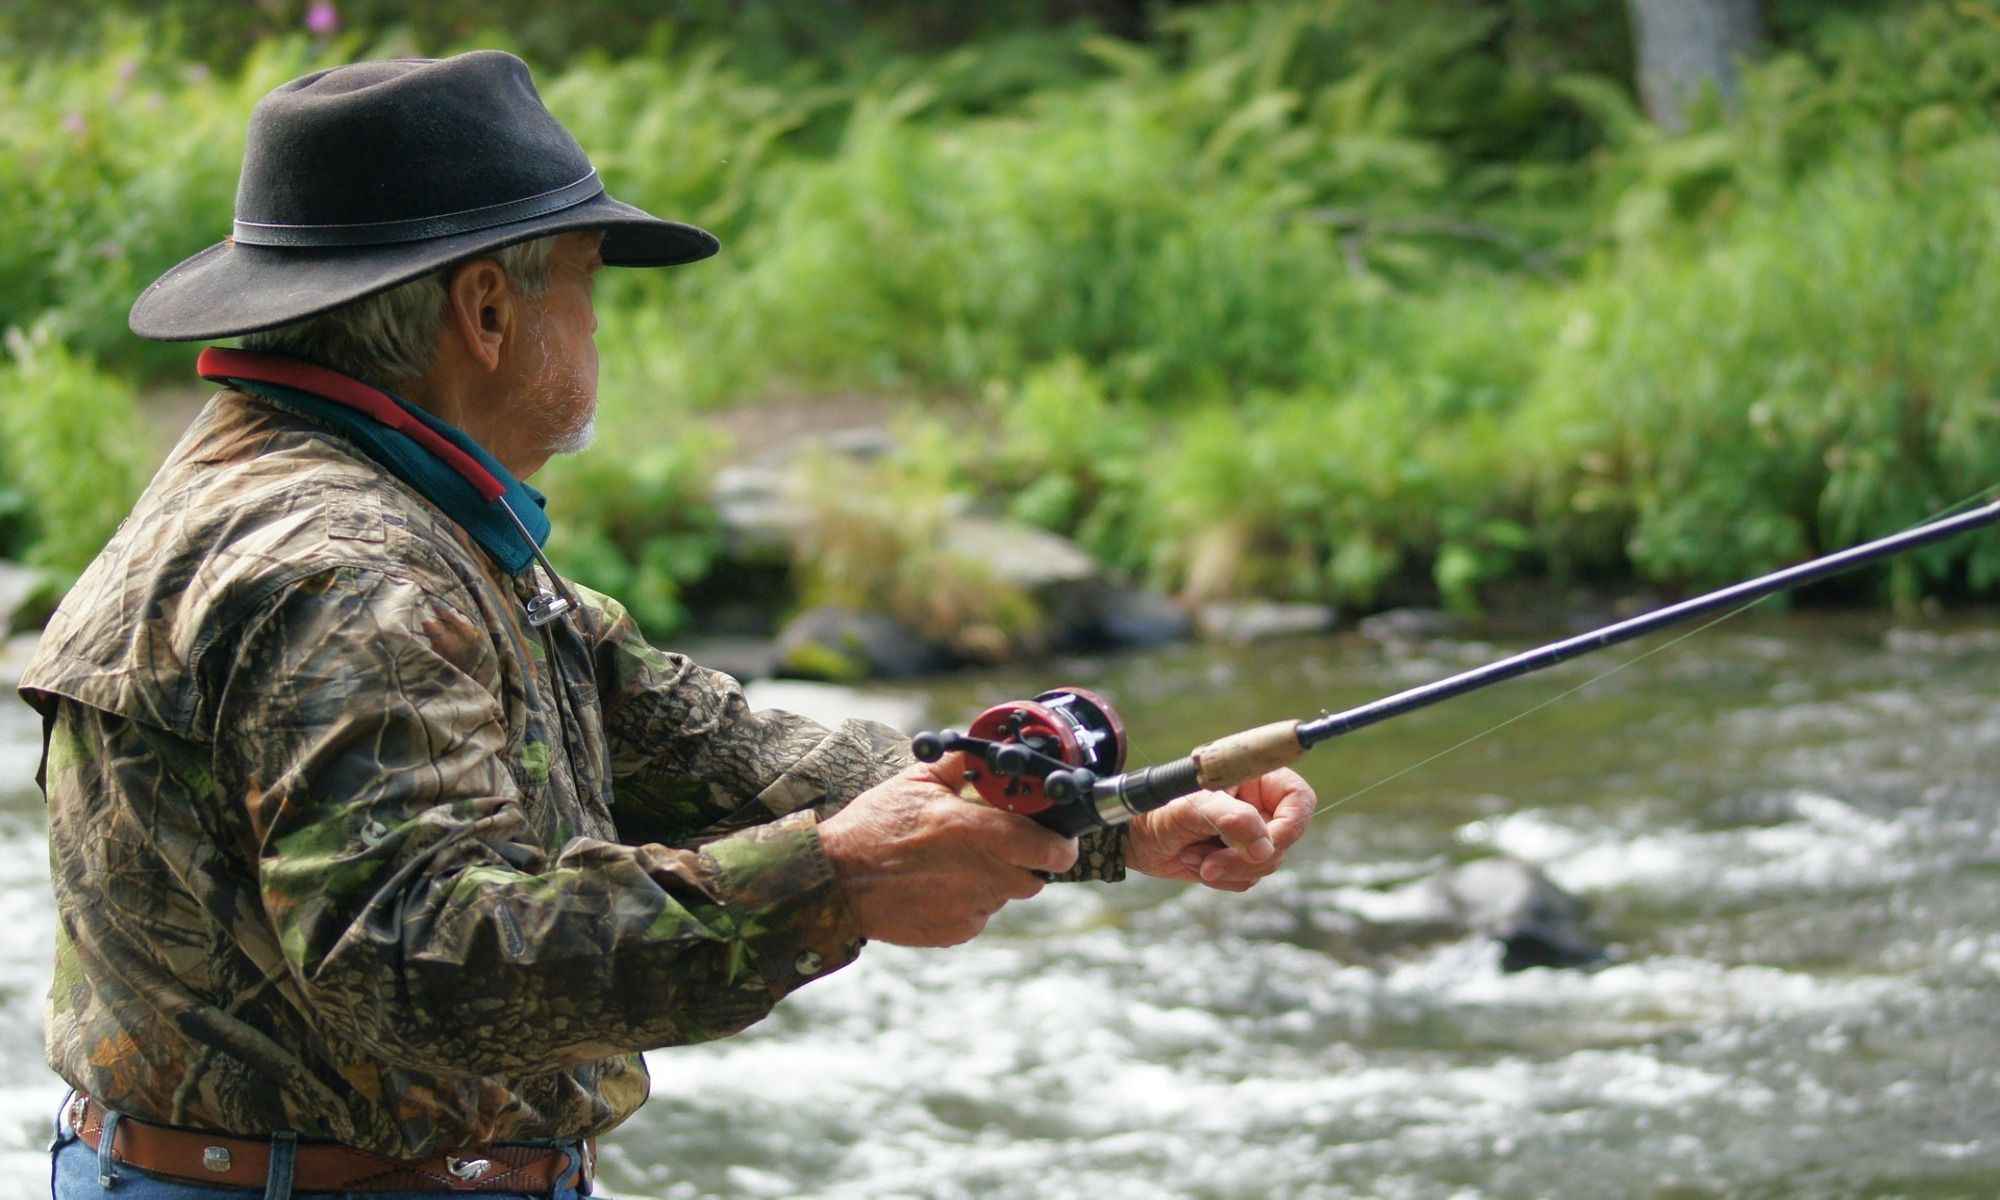 How to Improve Accuracy with Short Fly Rods